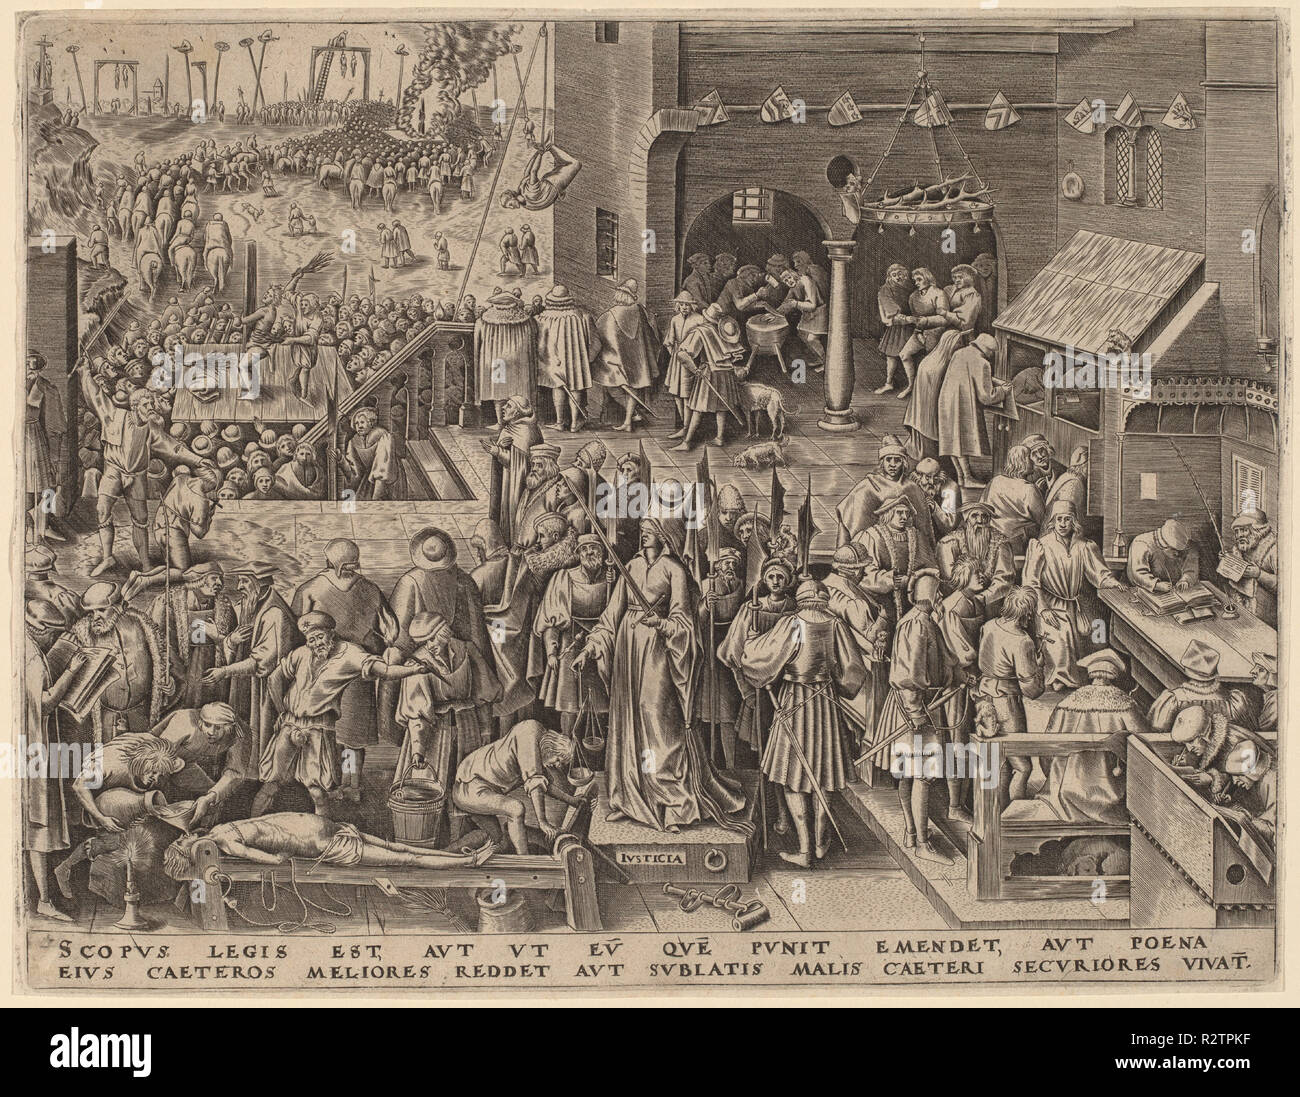 Justice. Dated: published 1559. Medium: engraving. Museum: National Gallery of Art, Washington DC. Author: Attributed to Philip Galle after Pieter Bruegel the Elder. Bruegel (Brueghel), Pieter, the Elder. Stock Photo